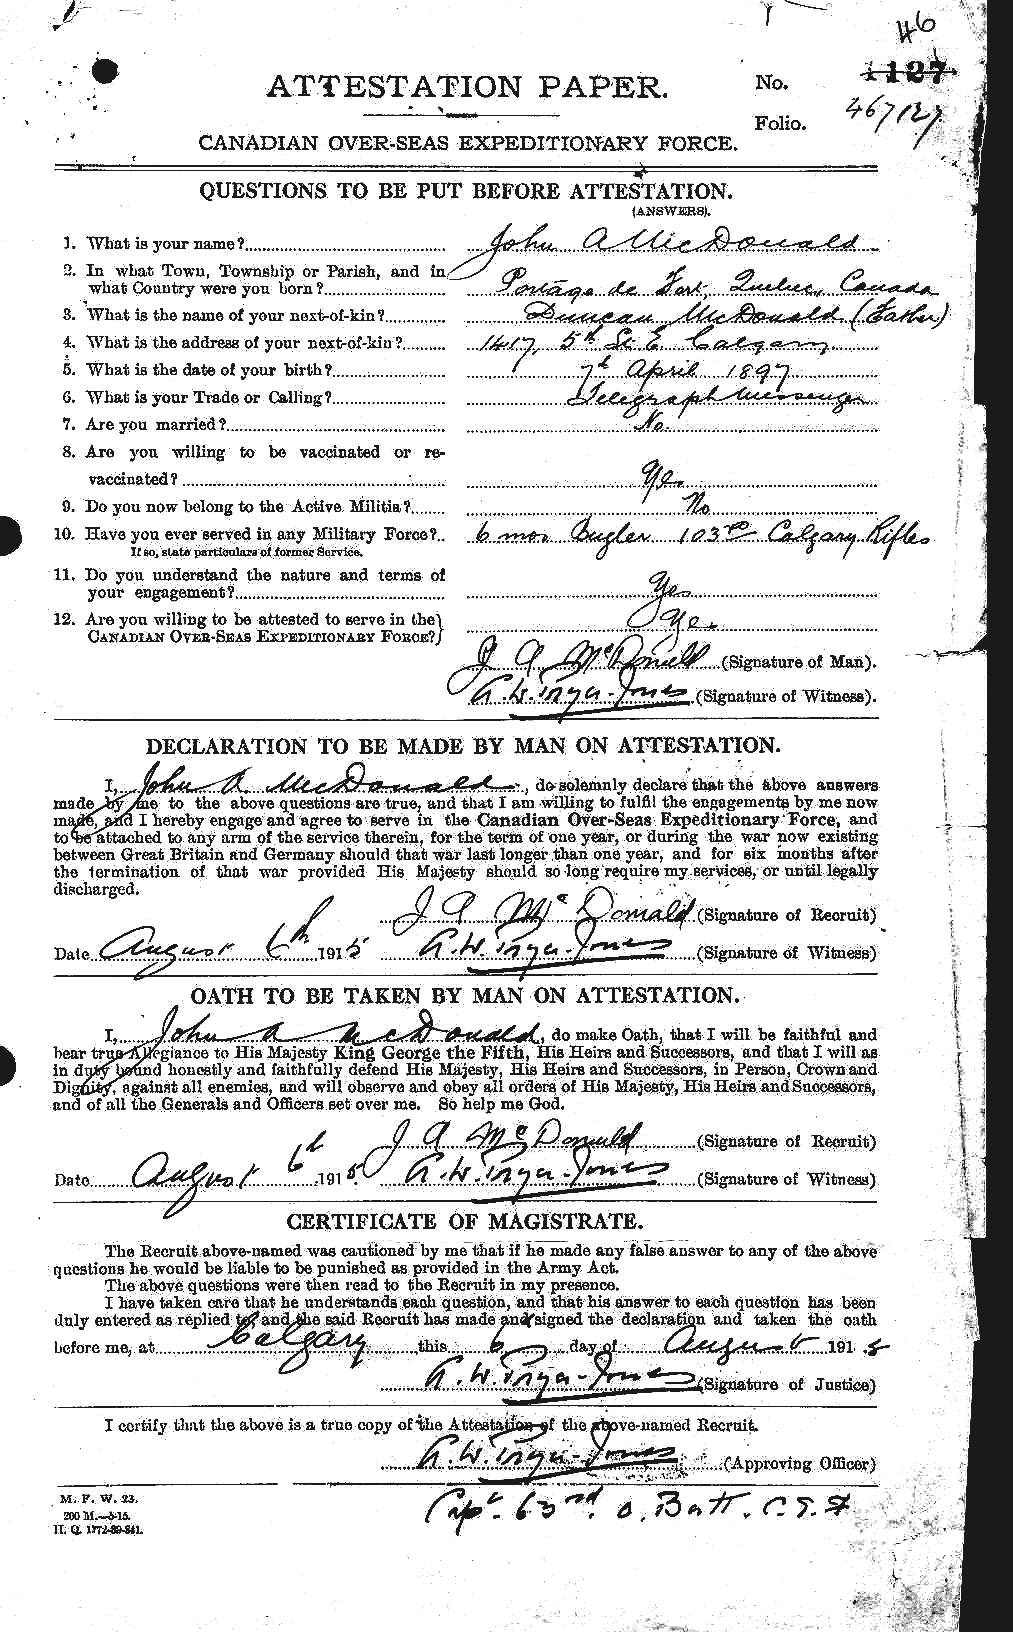 Personnel Records of the First World War - CEF 532383a